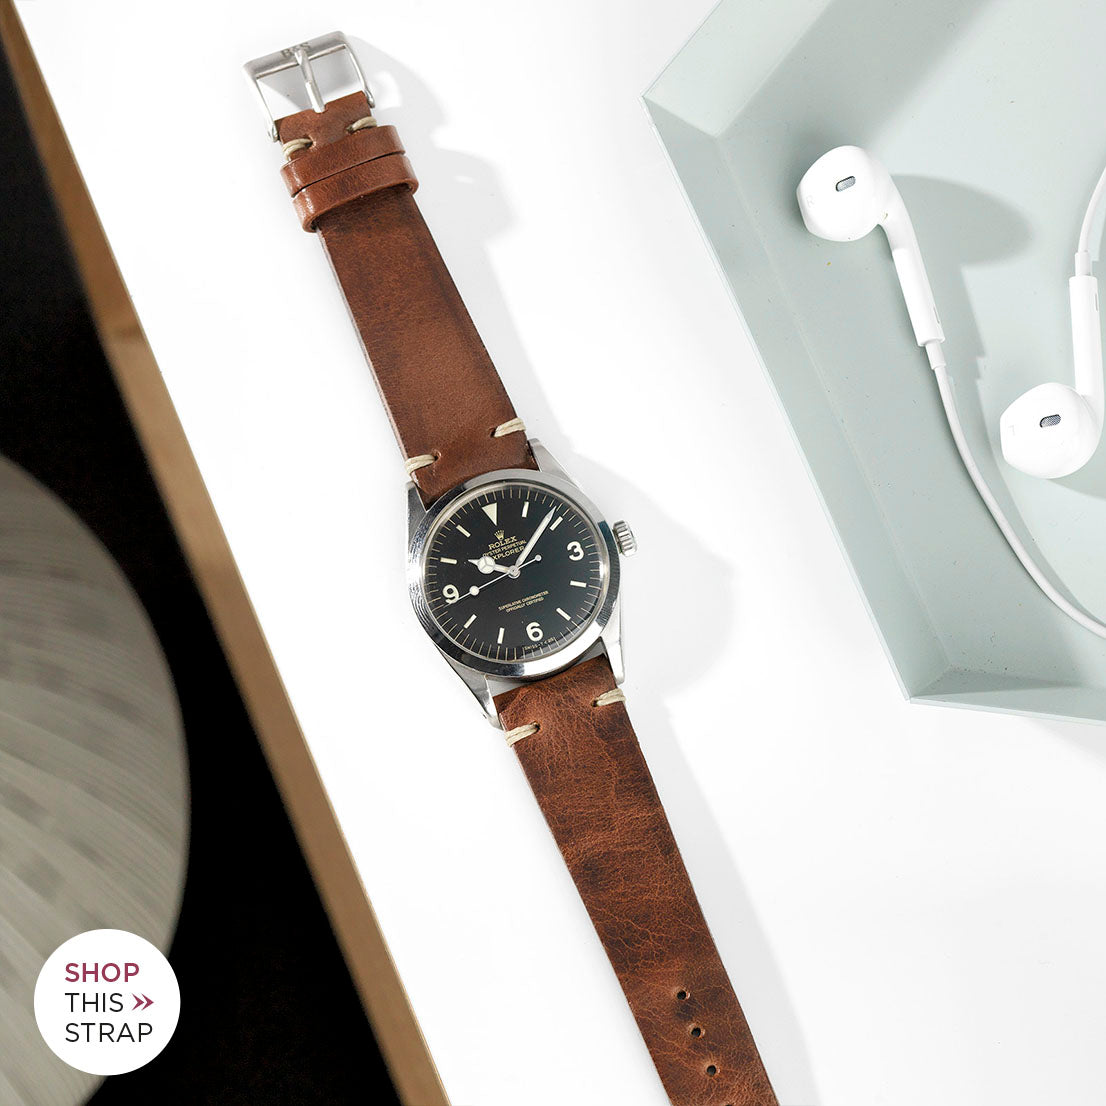 Bulang and Sons_Strap Guide_The Rolex 1016 Explorer_Siena Brown Leather Watch Strap